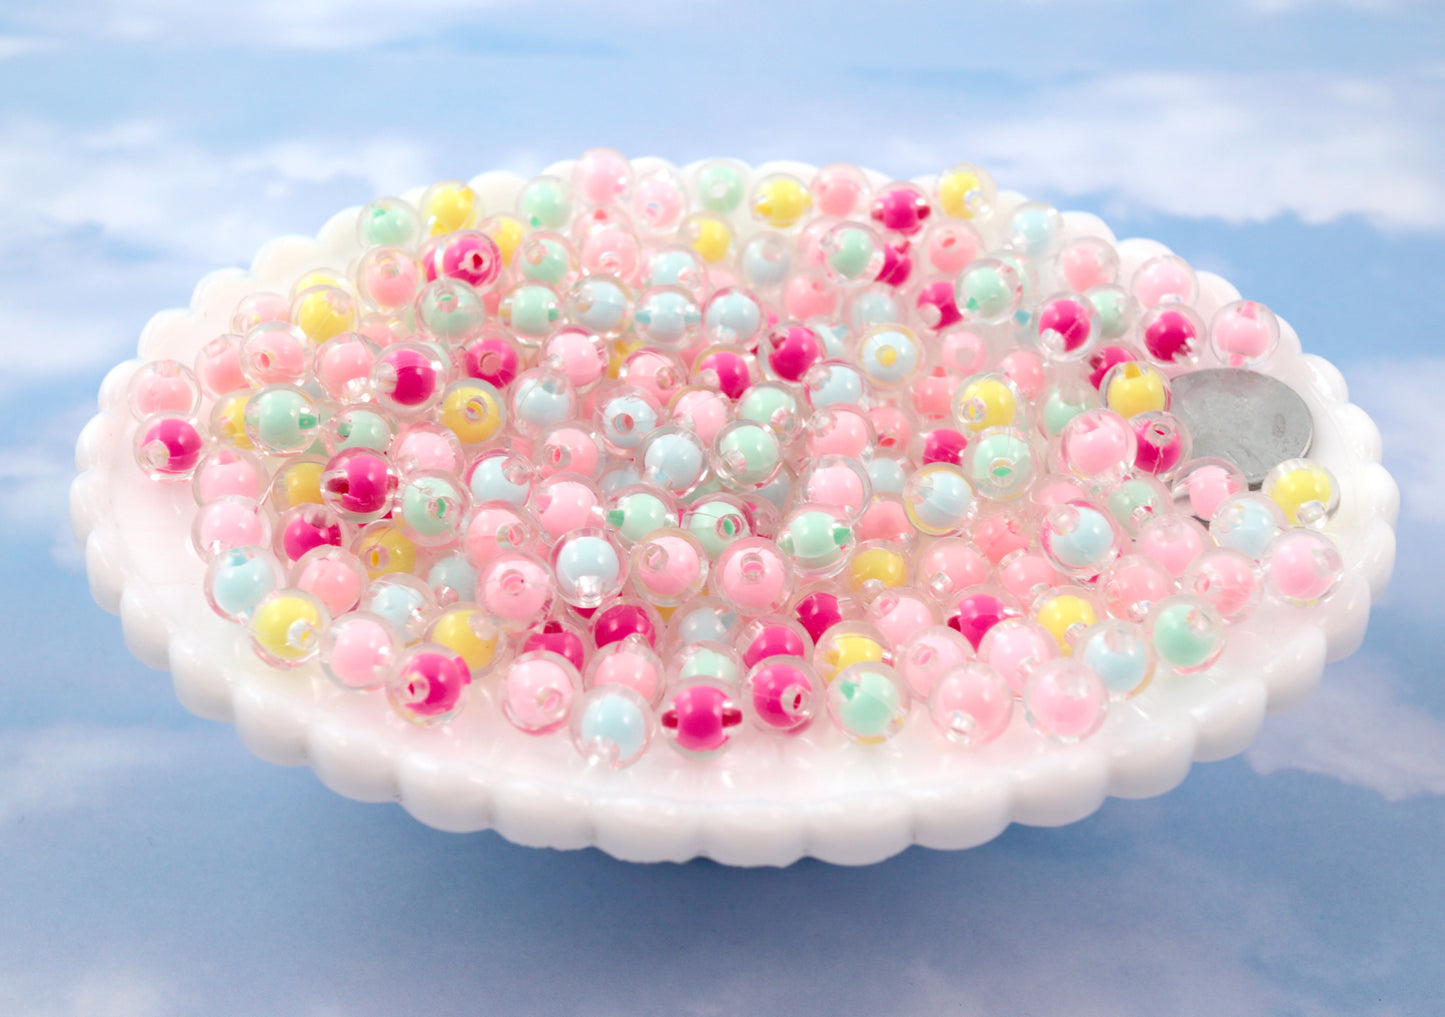 Pastel Beads - 8mm Tiny Pastel Double Inner Bead Resin or Acrylic Beads - 200 pc set